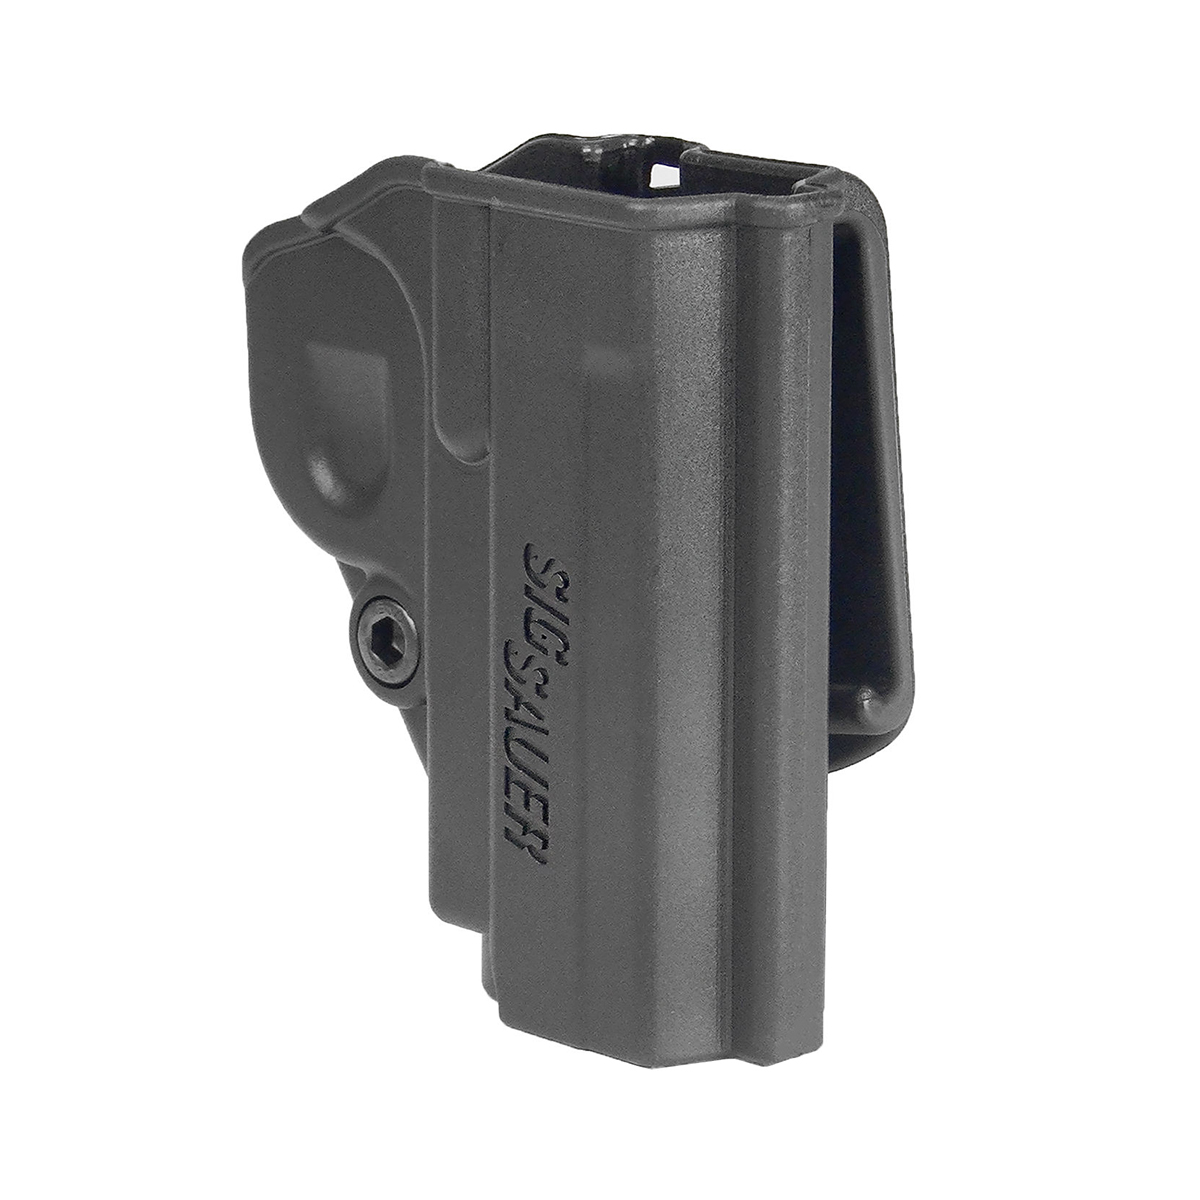 Details about   1x P238 SIG SAUER HOLSTER CLIPS to BELT 